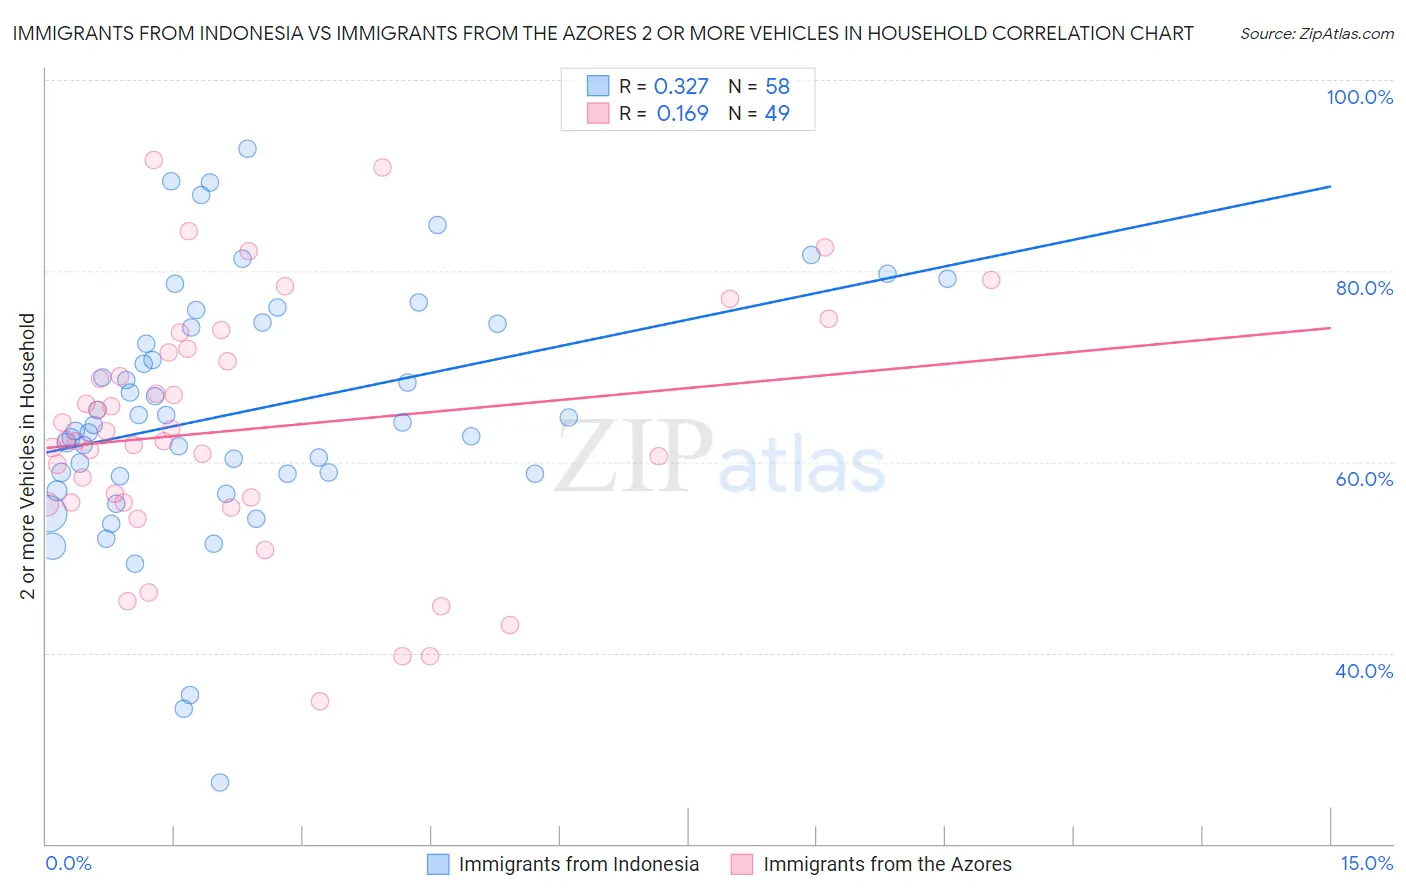 Immigrants from Indonesia vs Immigrants from the Azores 2 or more Vehicles in Household